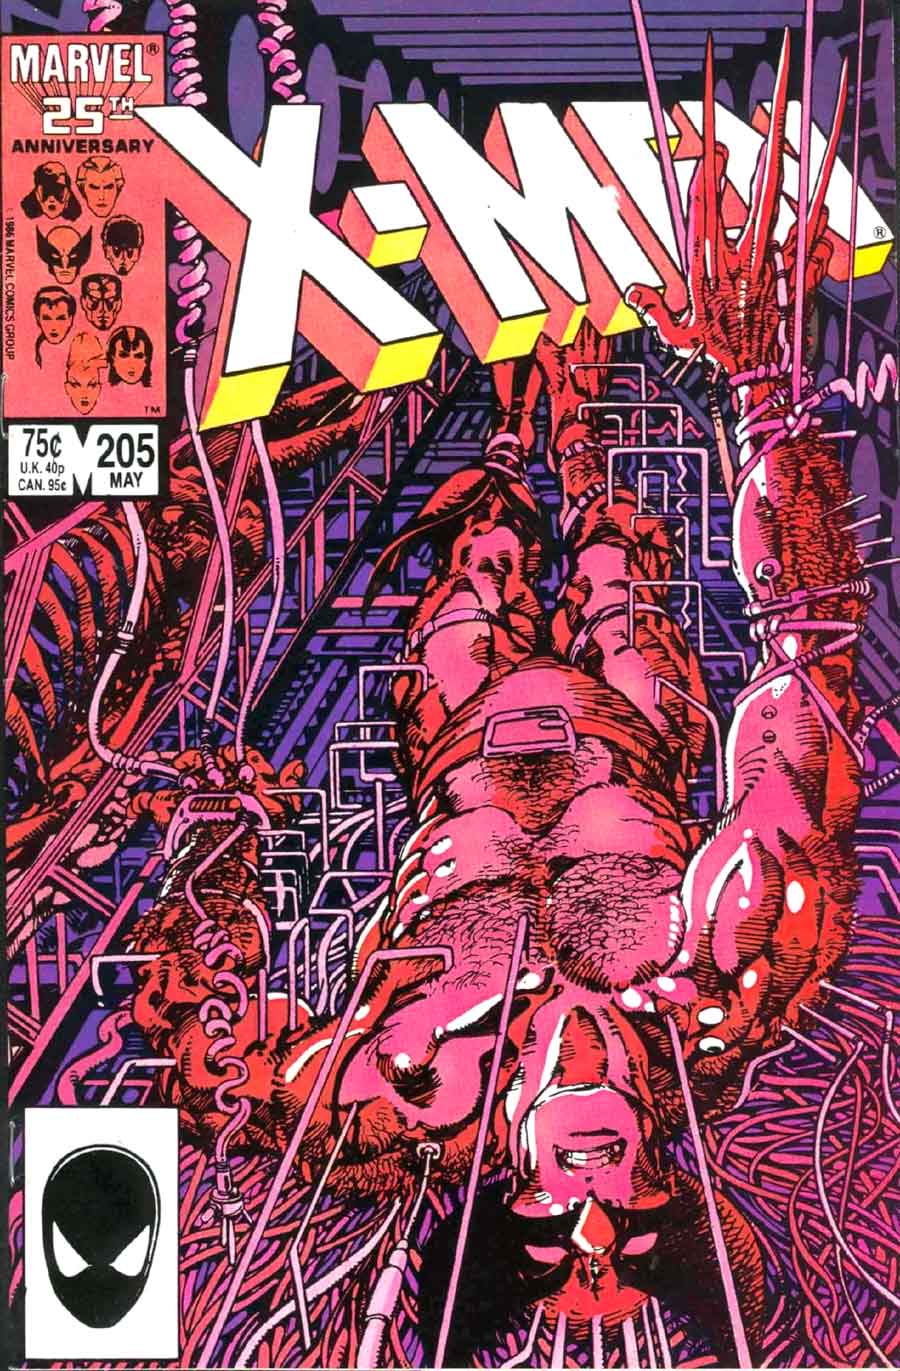 X-men #205 marvel 1980s comic book cover art by Barry Windsor Smith